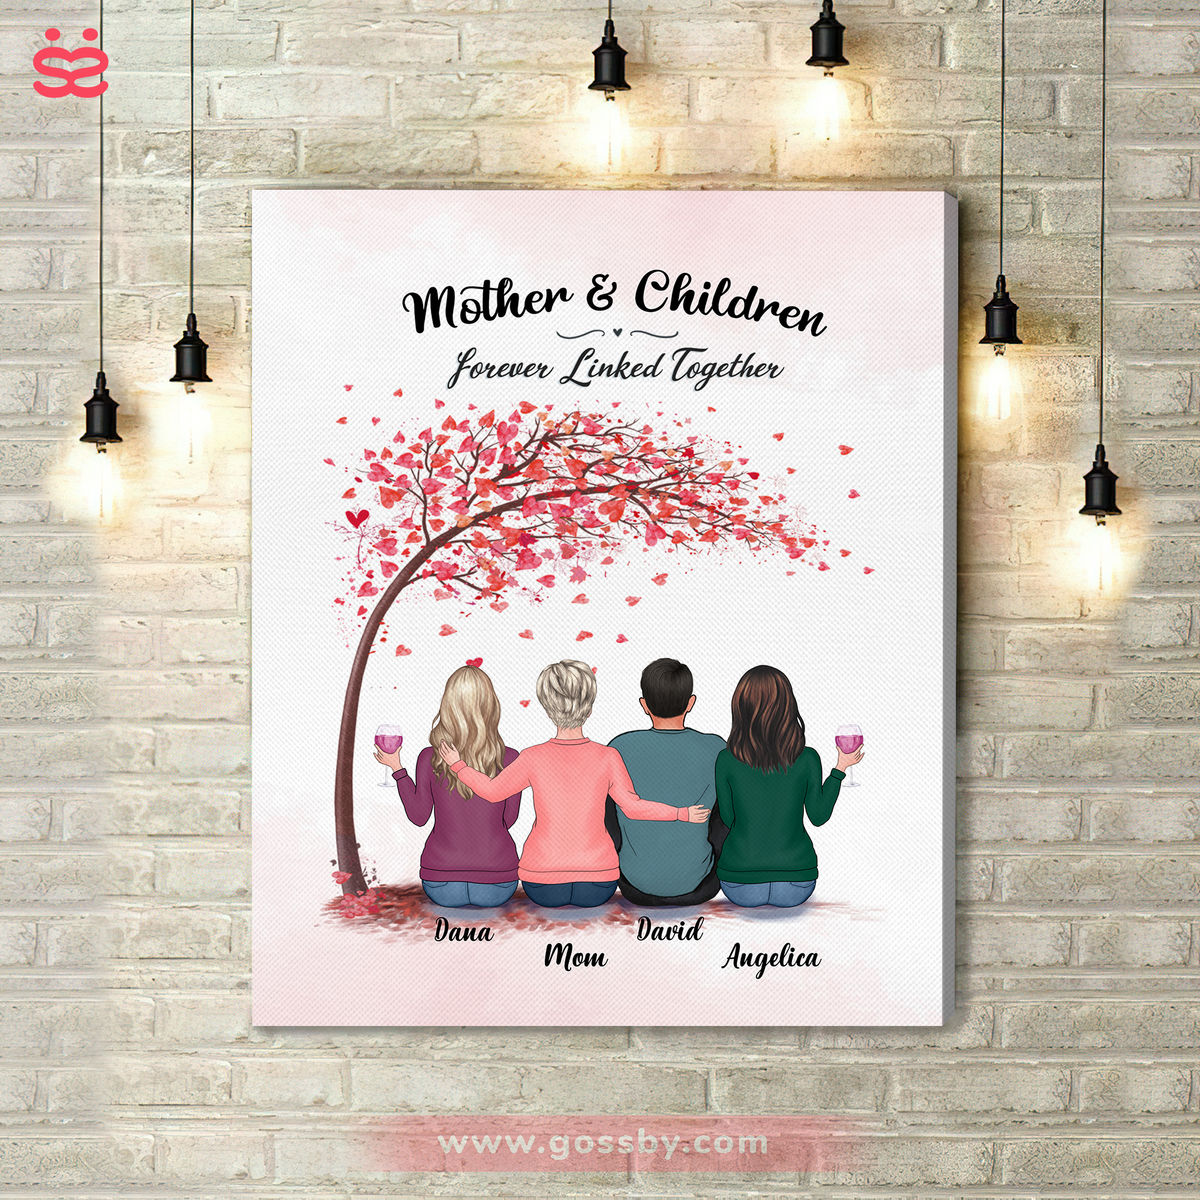 Personalized Wrapped Canvas - Mother & Children Forever Linked Together